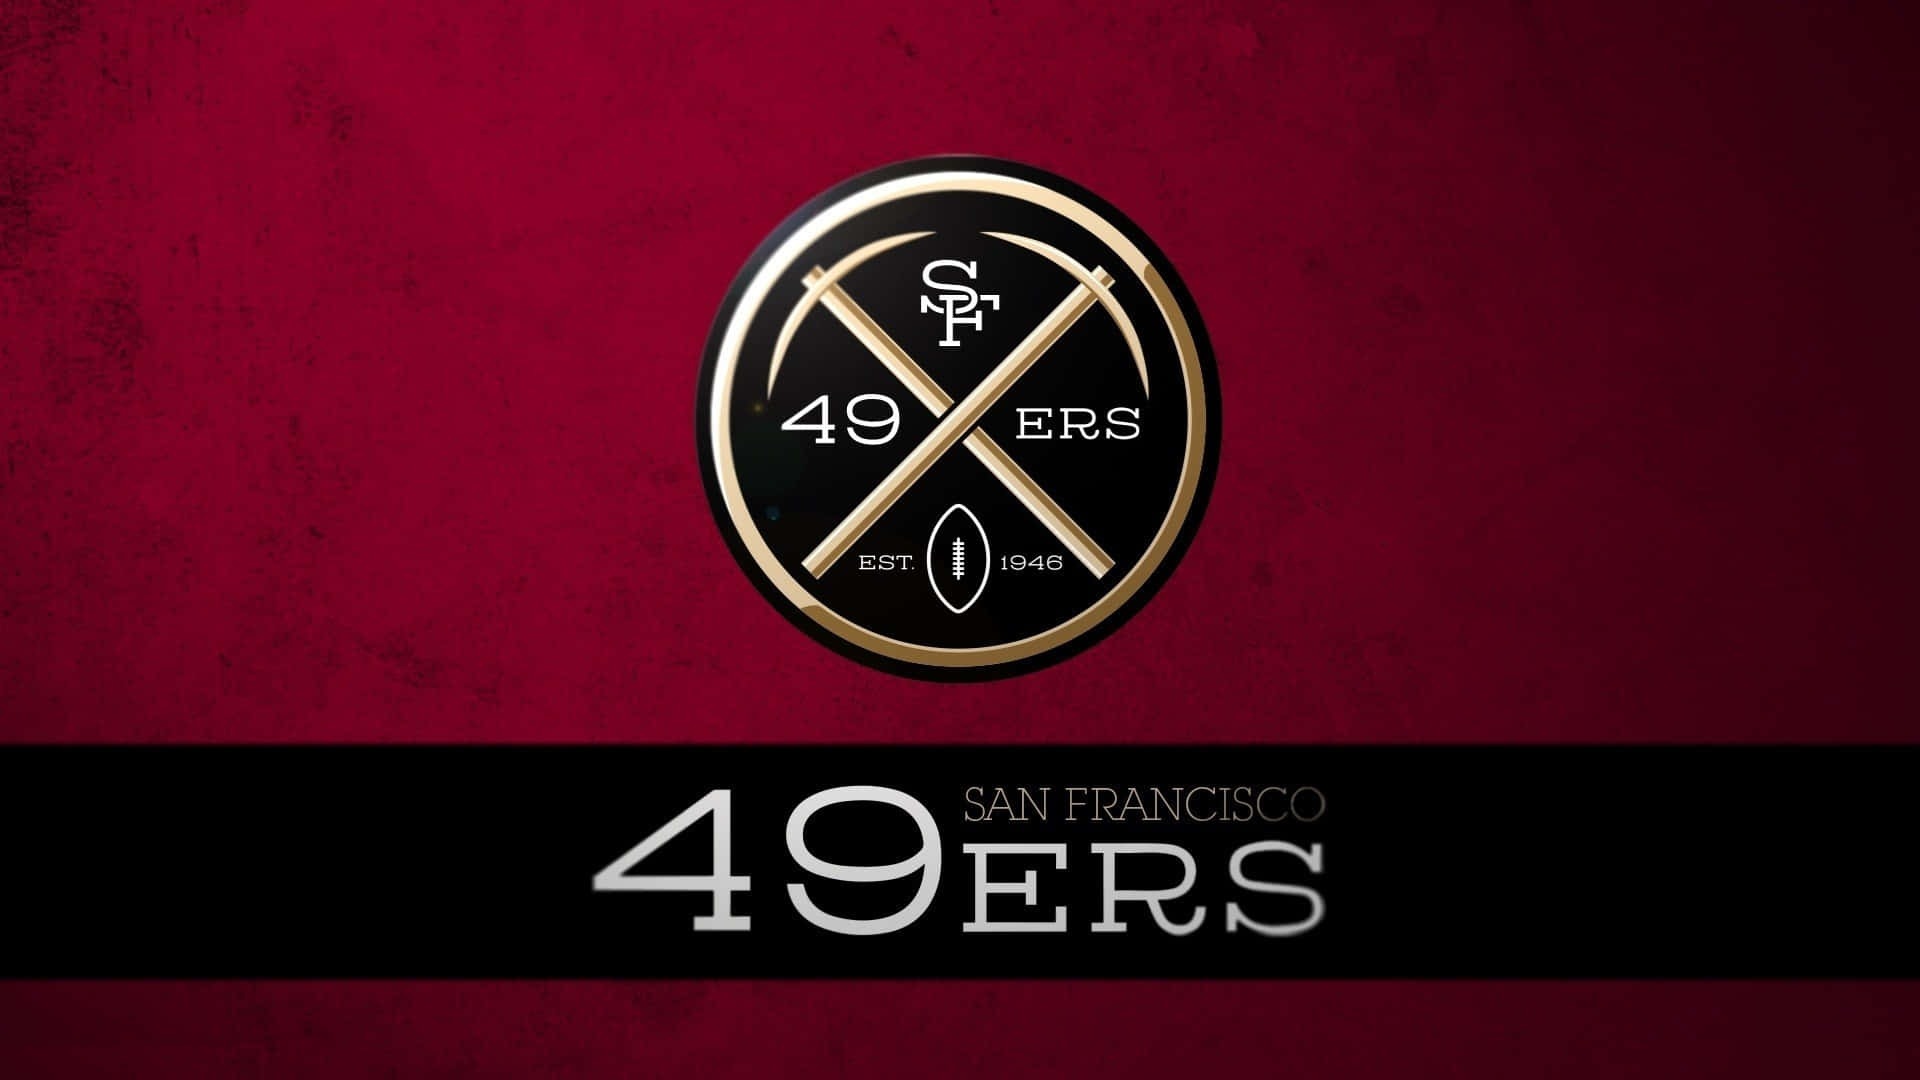 49ers logo on a red background